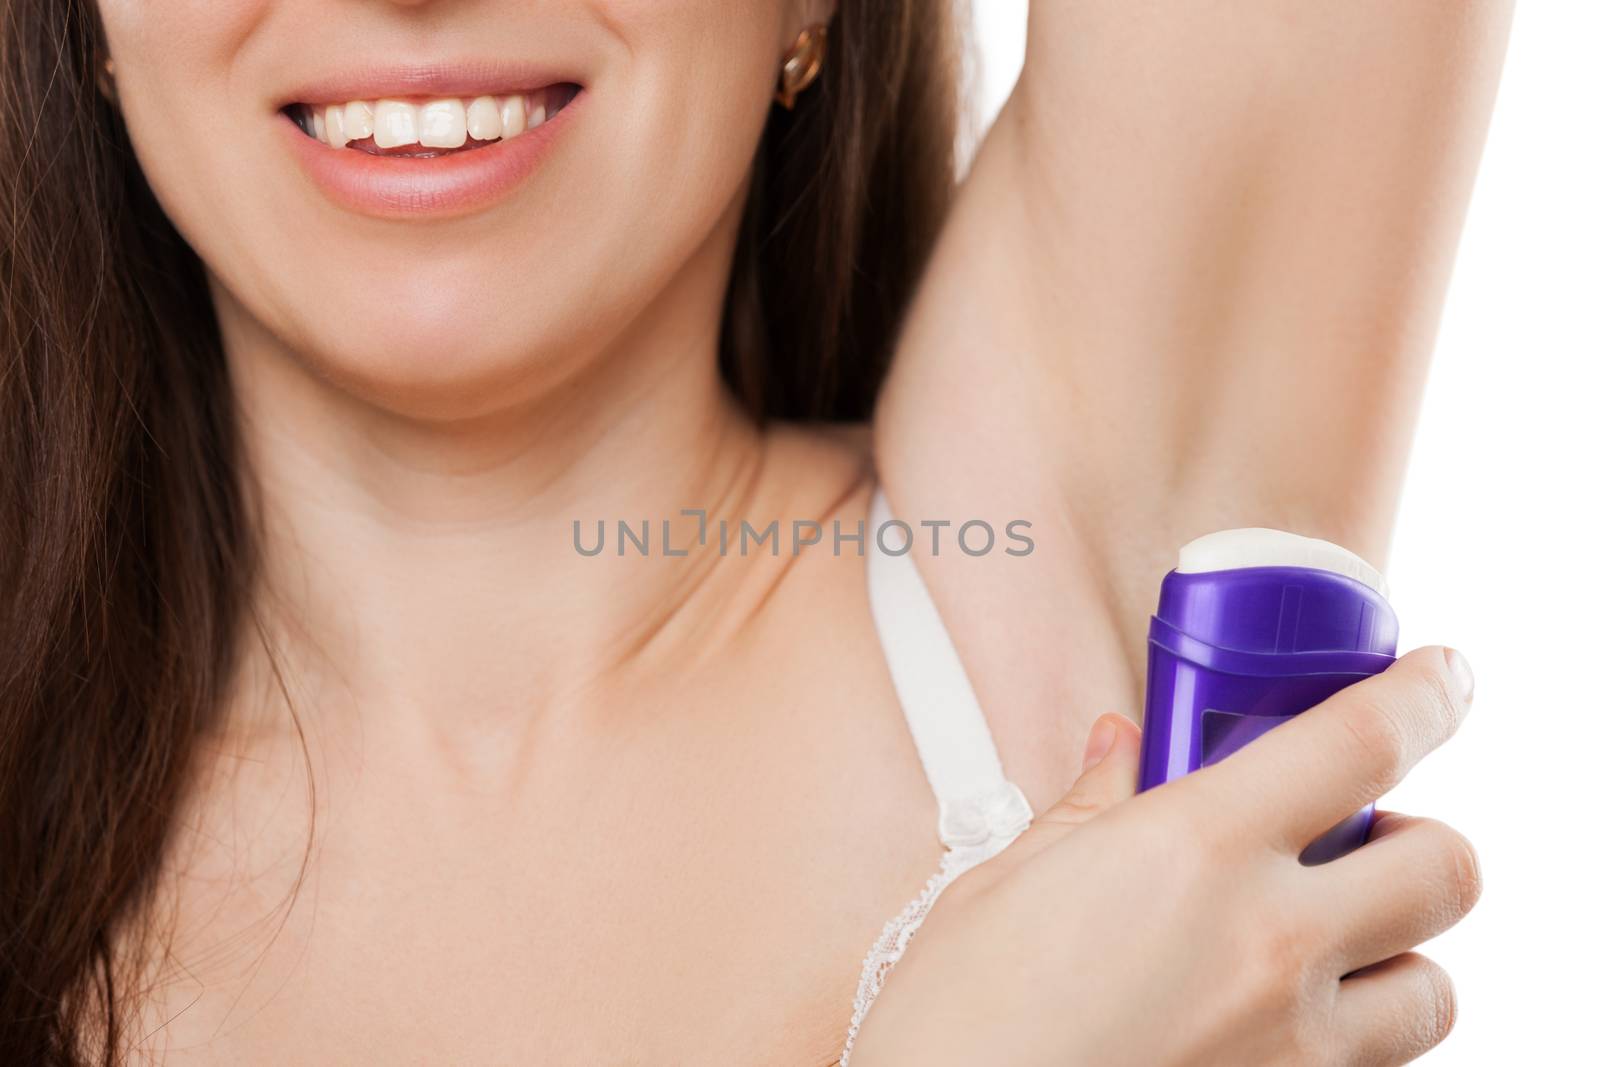 Beauty toothy smiling young woman hand holding stick deodorant applying on armpit skin for sweat or perspiration smell treatment white isolated